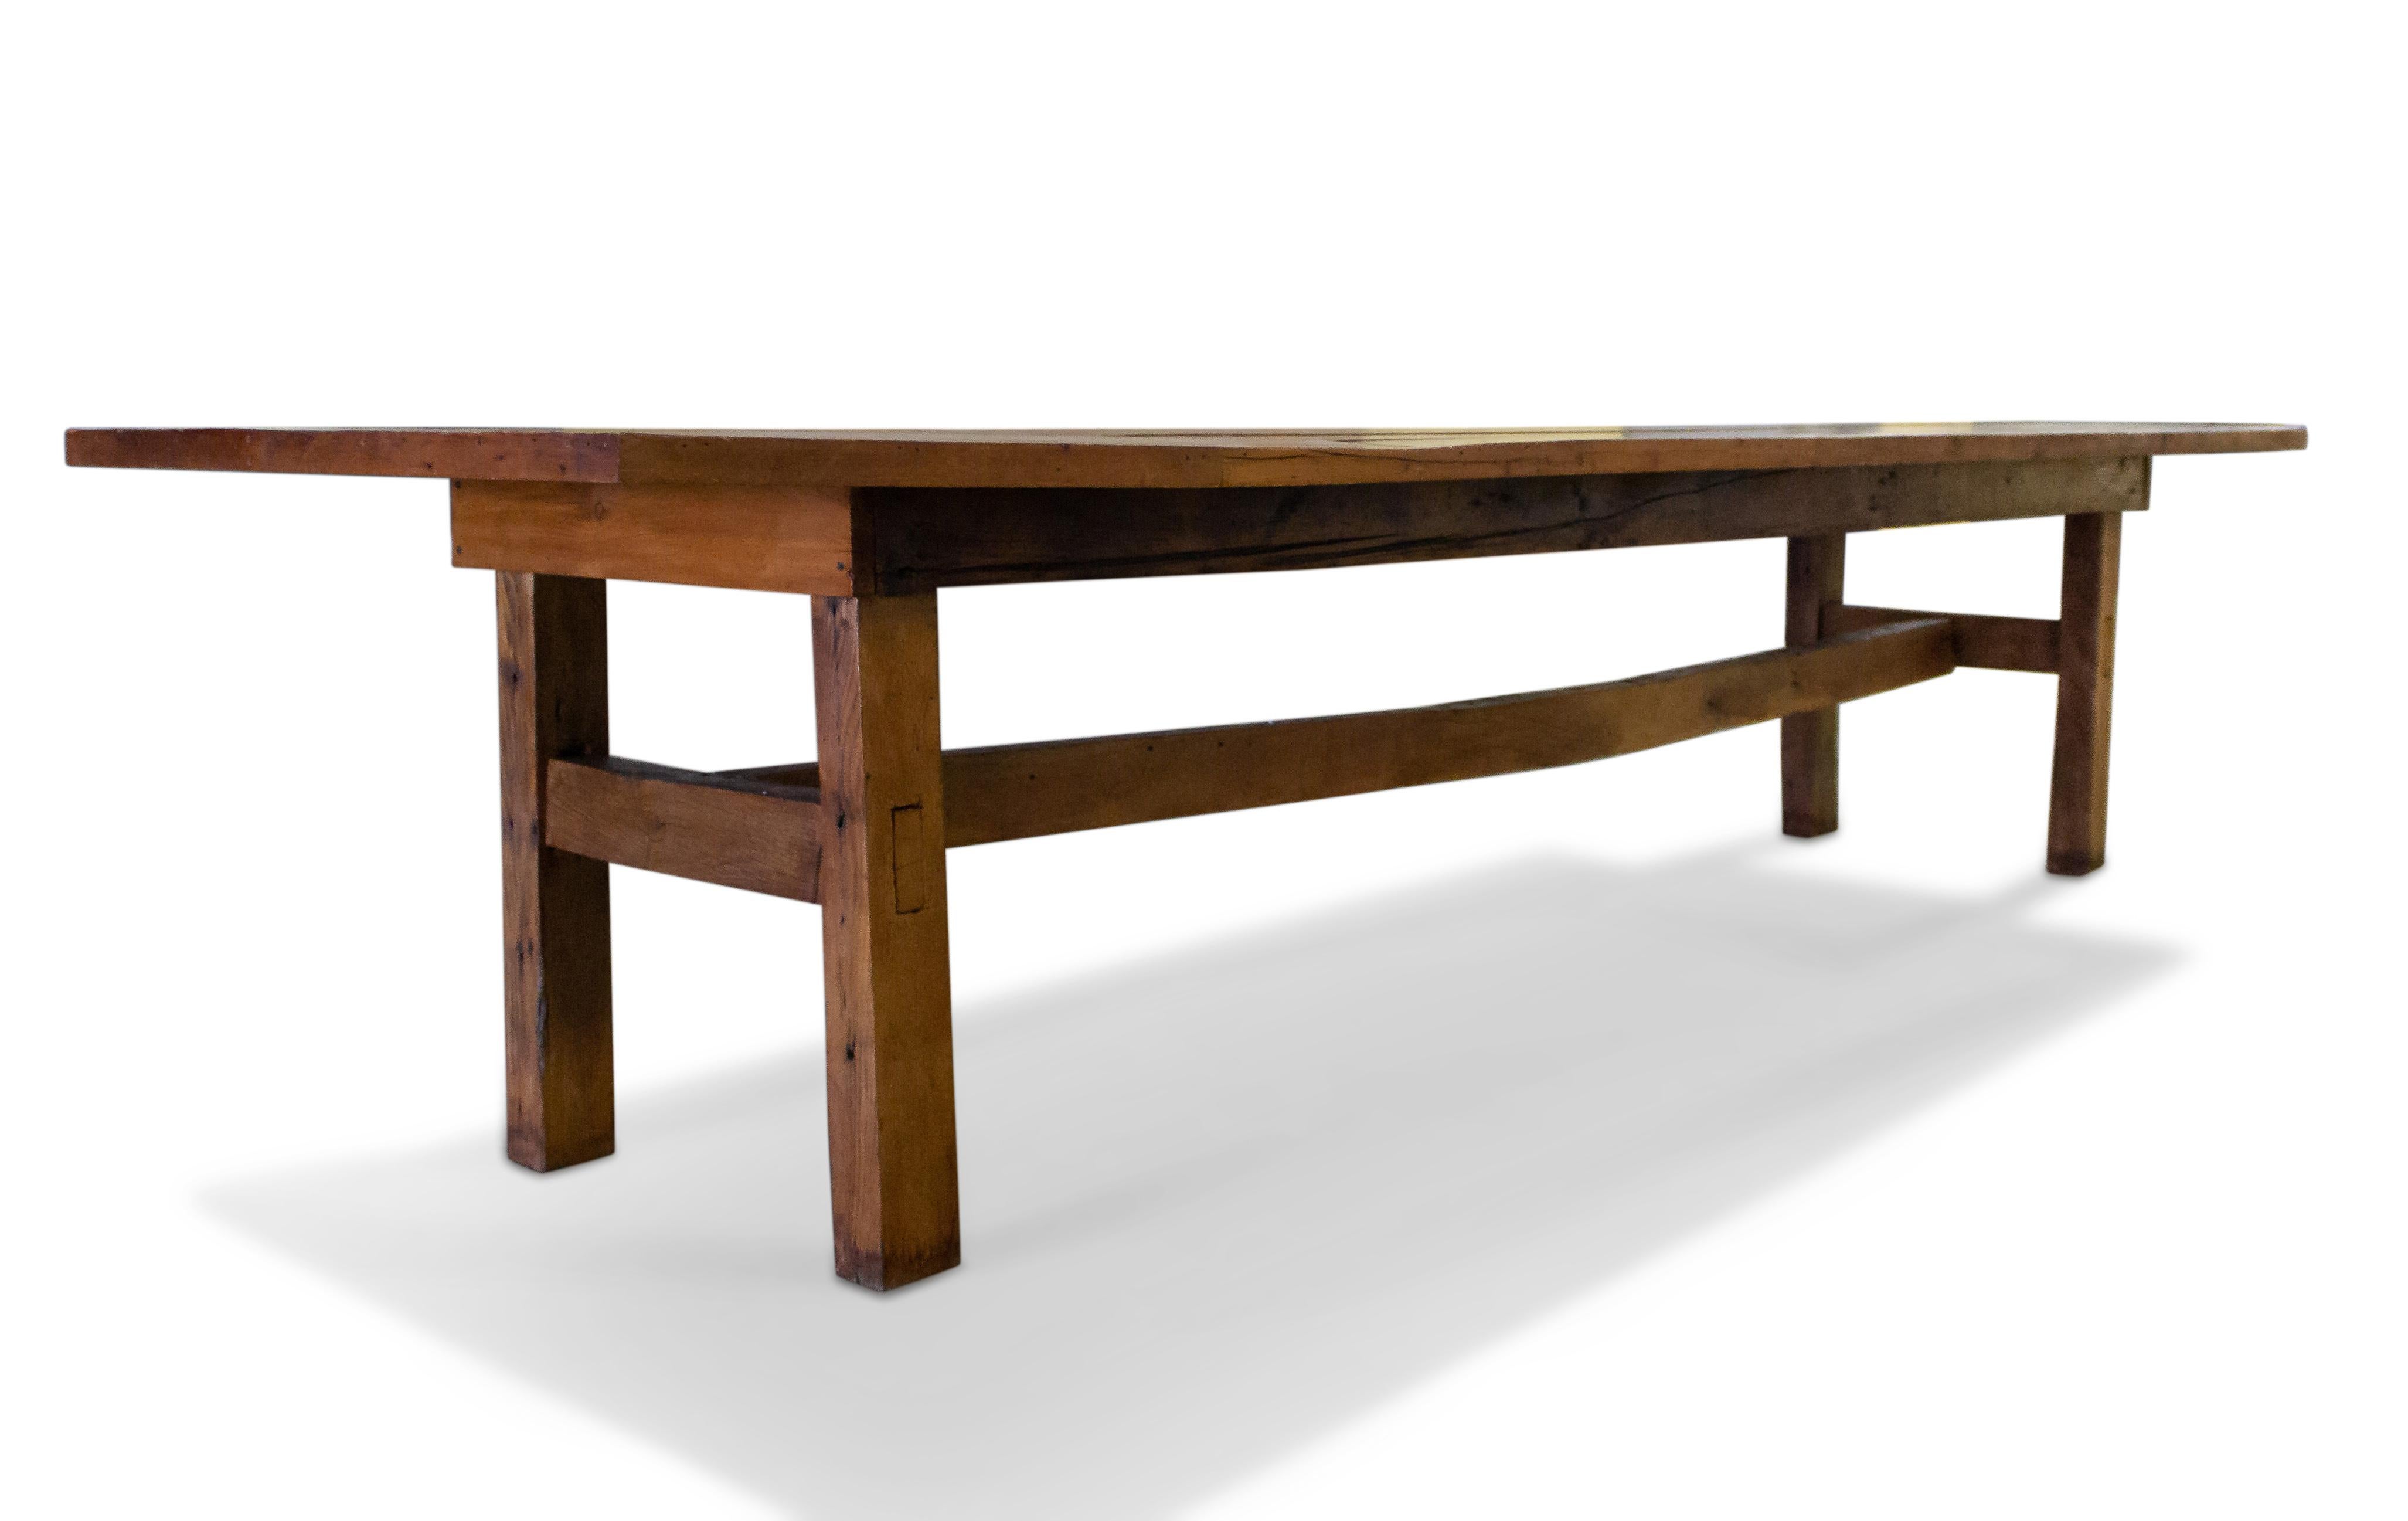 American Country style large pine plank top dining / refectory table with an oak stretcher base.